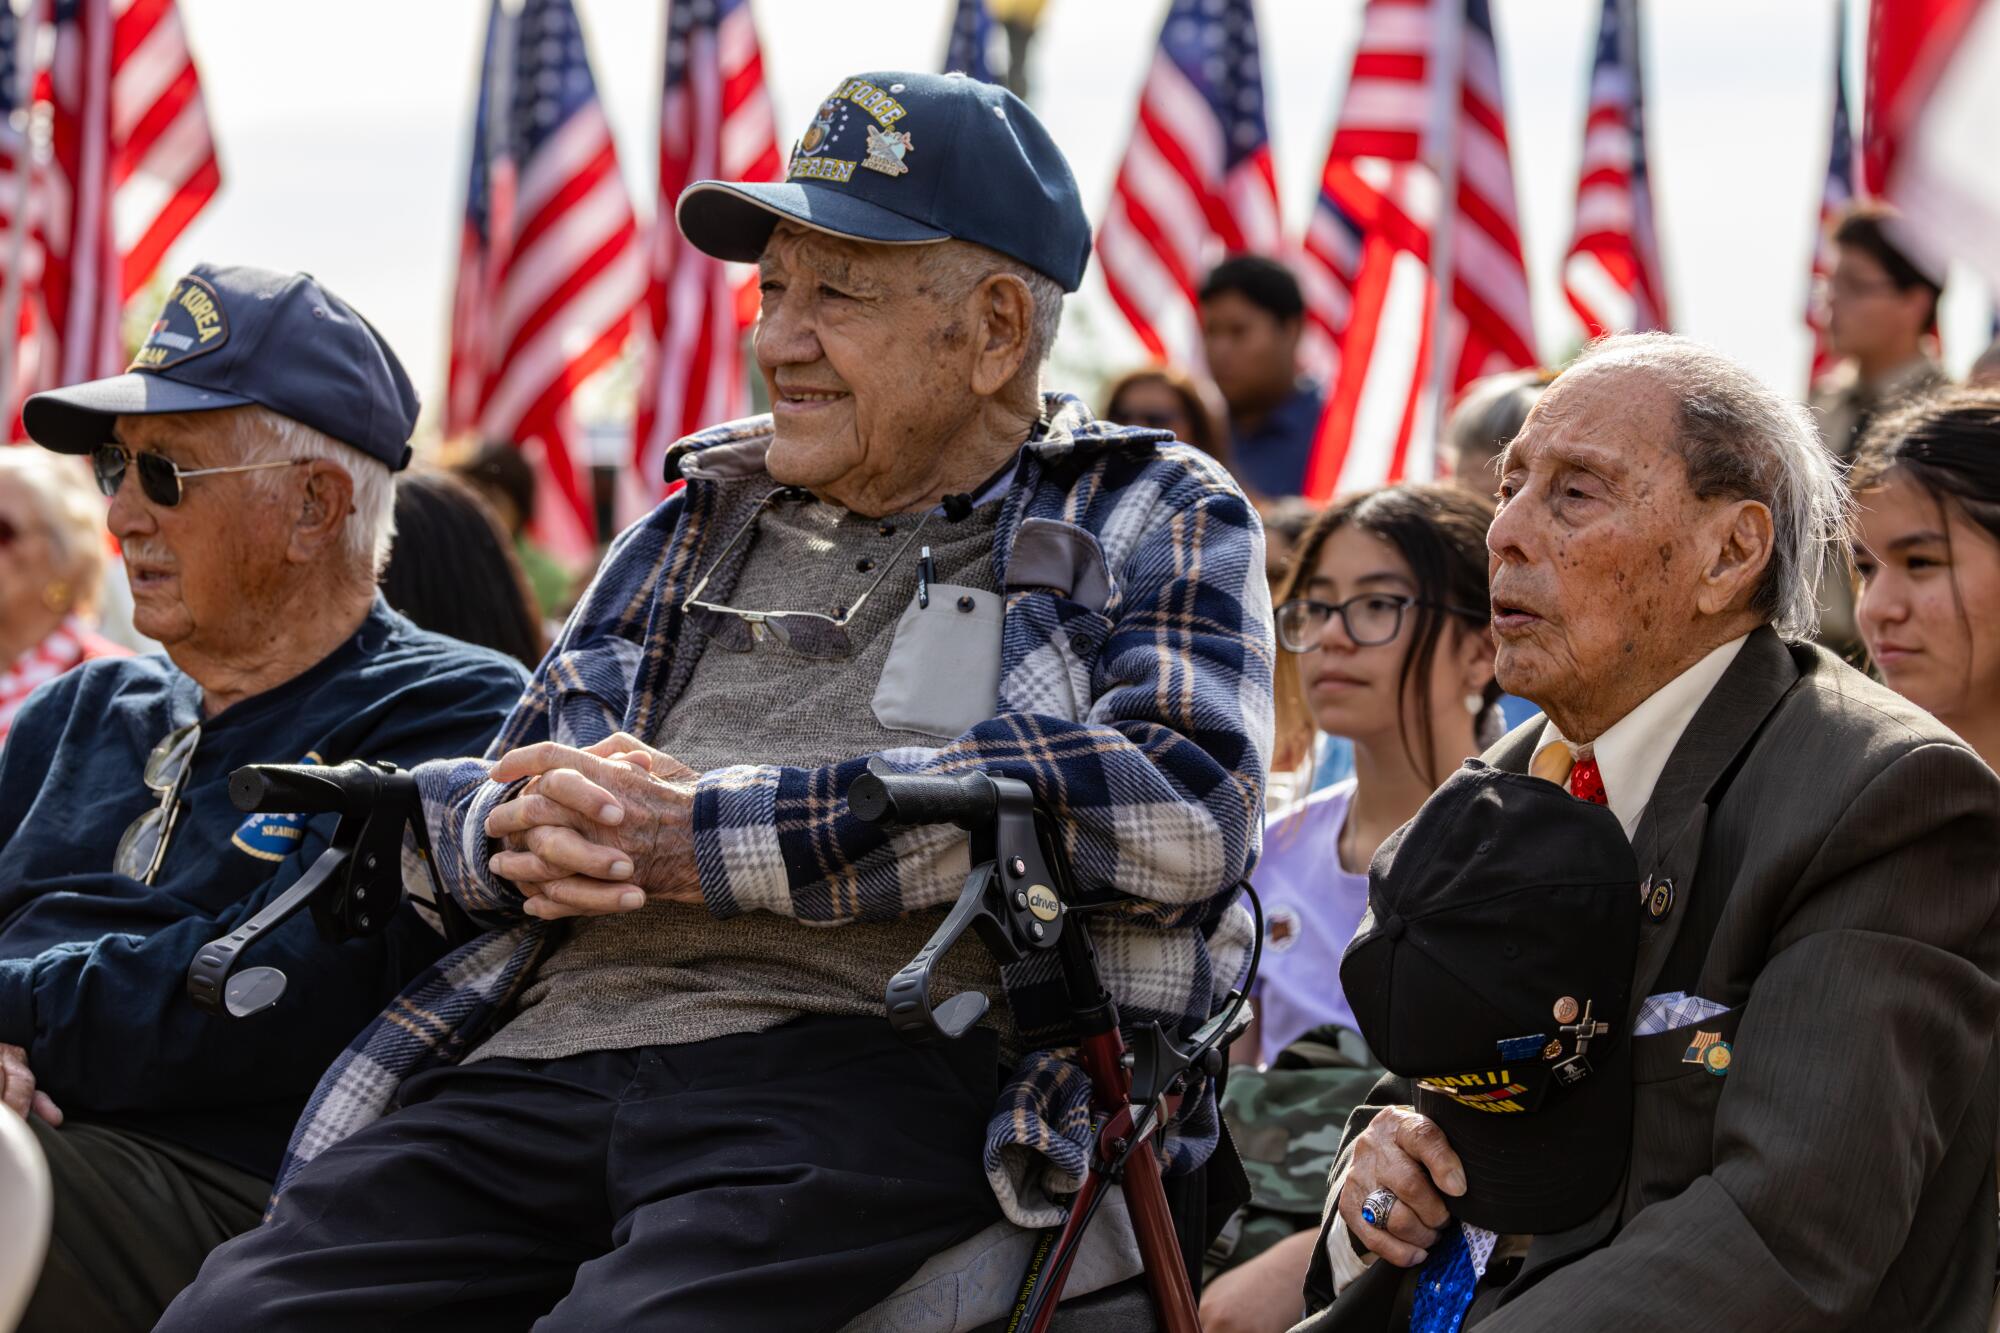 James Courson, Larry Stevens and Mike Valdivia are among veterans honored at a Veterans Day ceremony held at Plaza Park.